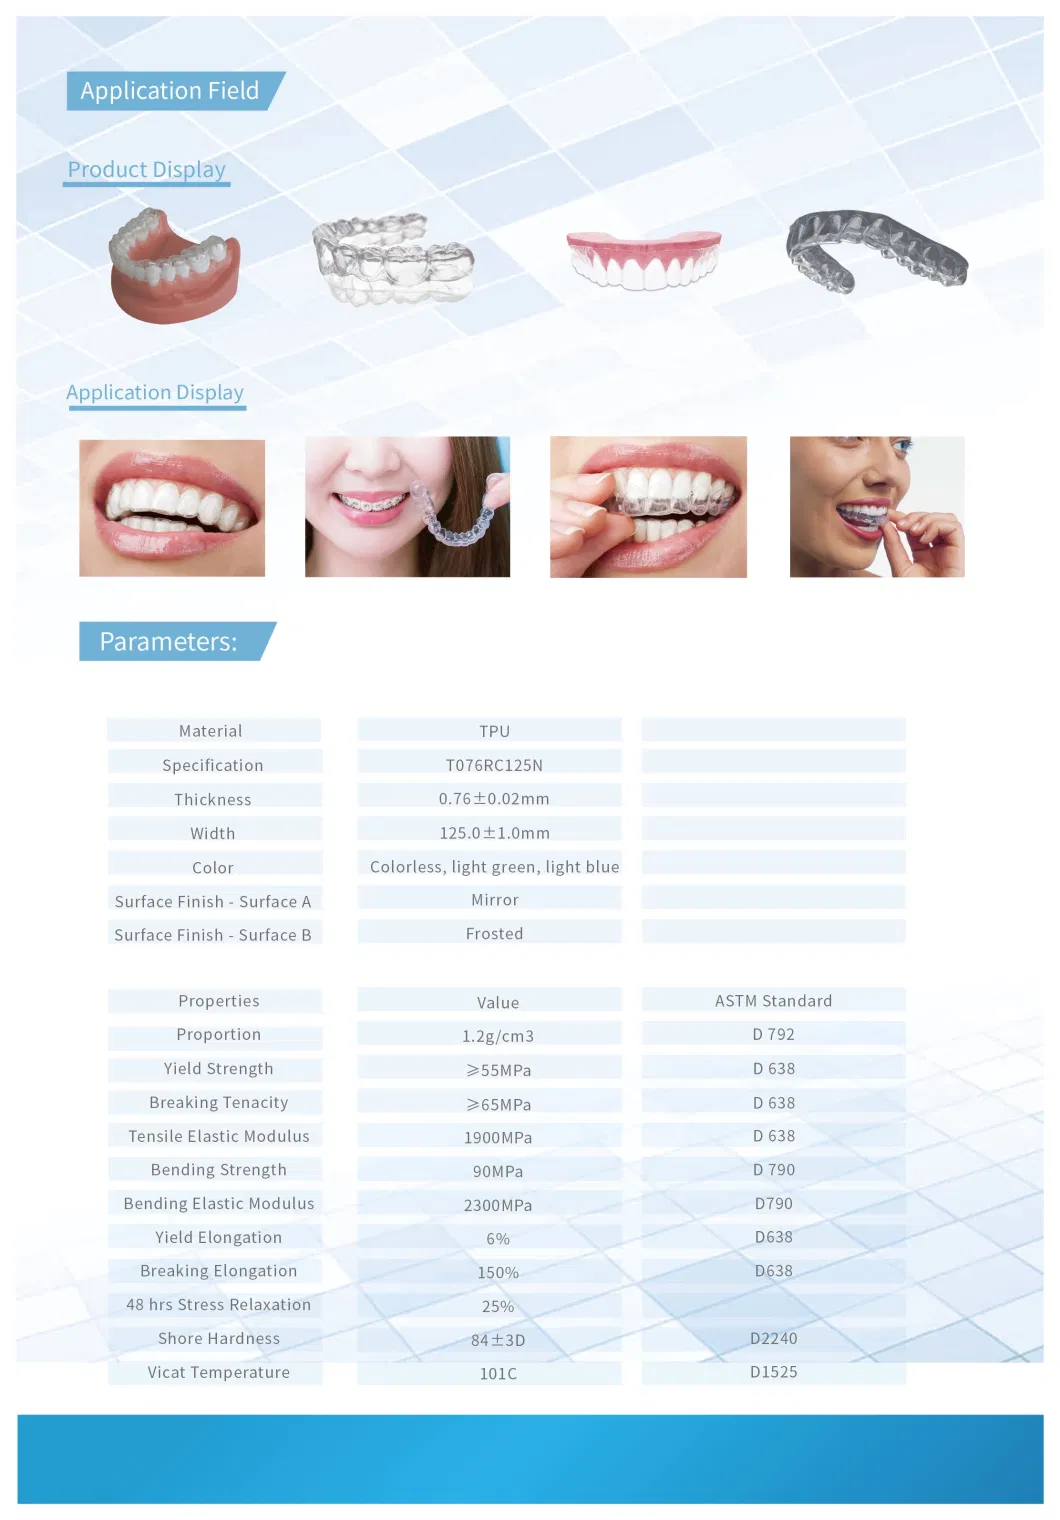 High Quality Value of Money Dental Foils for Making Clear Aligners